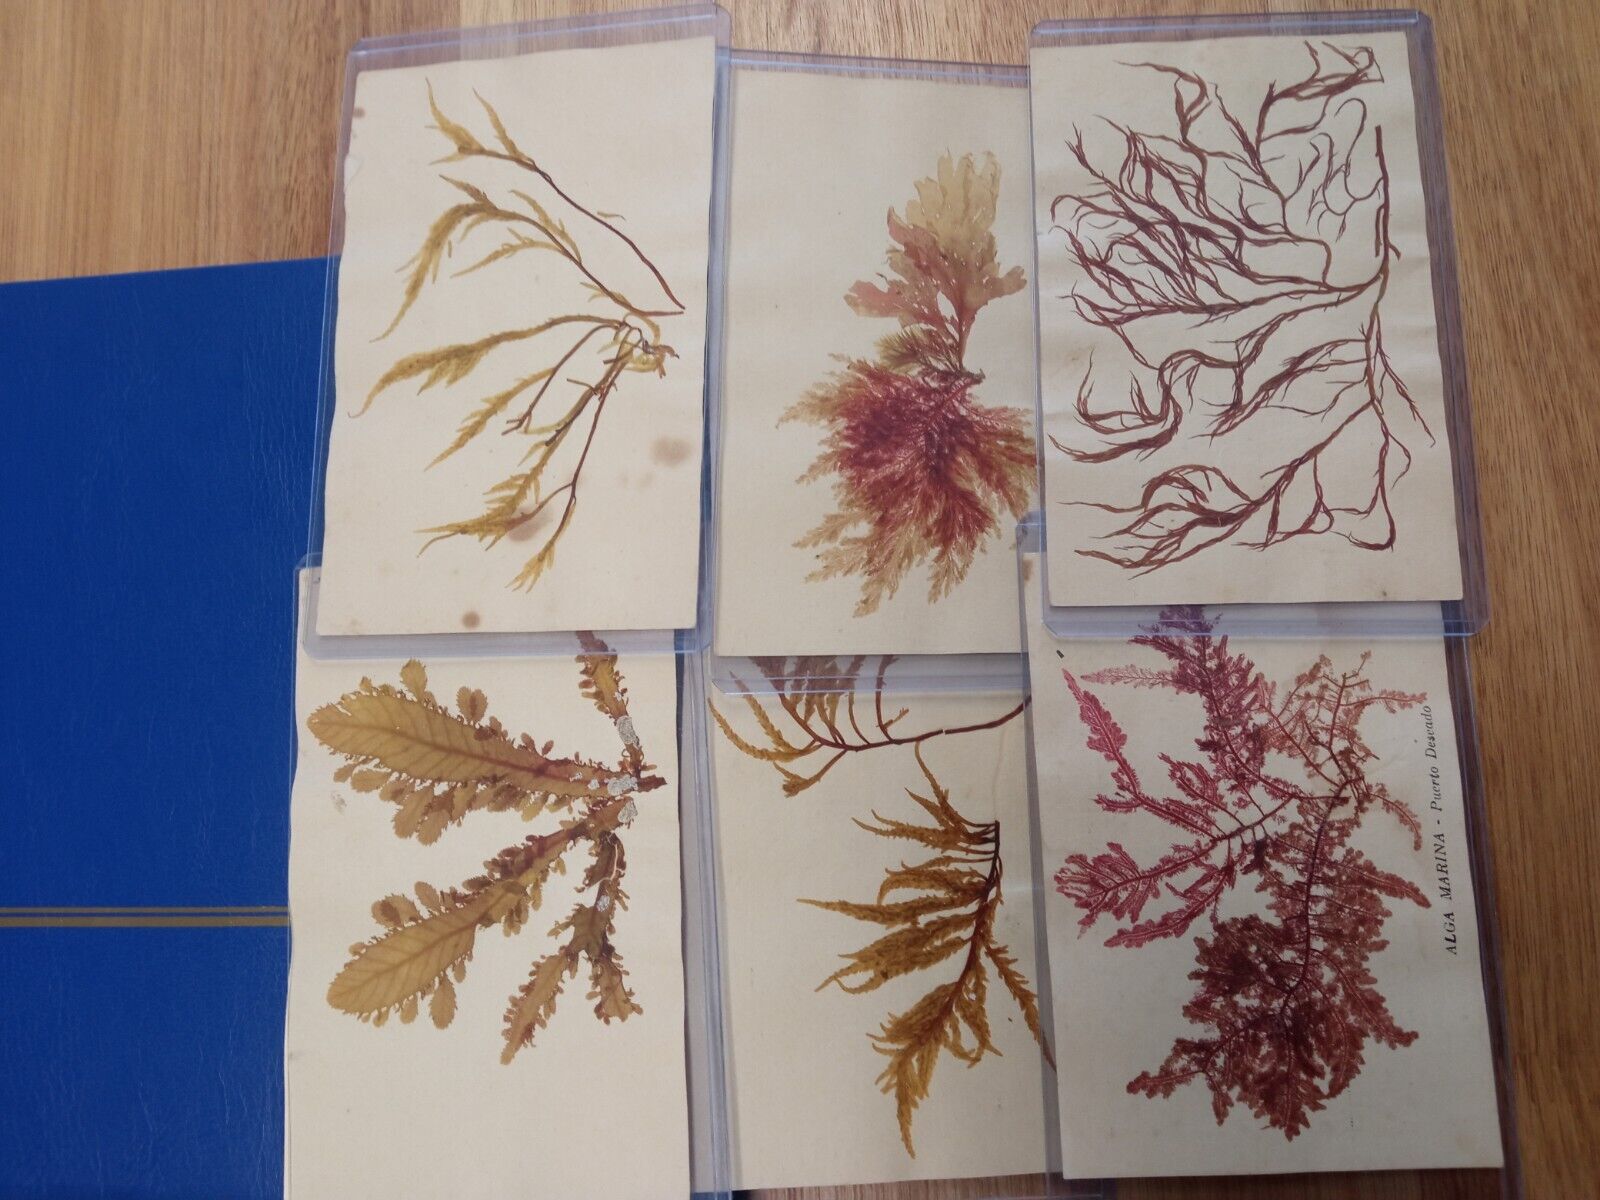 Original 1900s Postcards with Dehydrated Seaweeds from Patagonia Coast Argentina